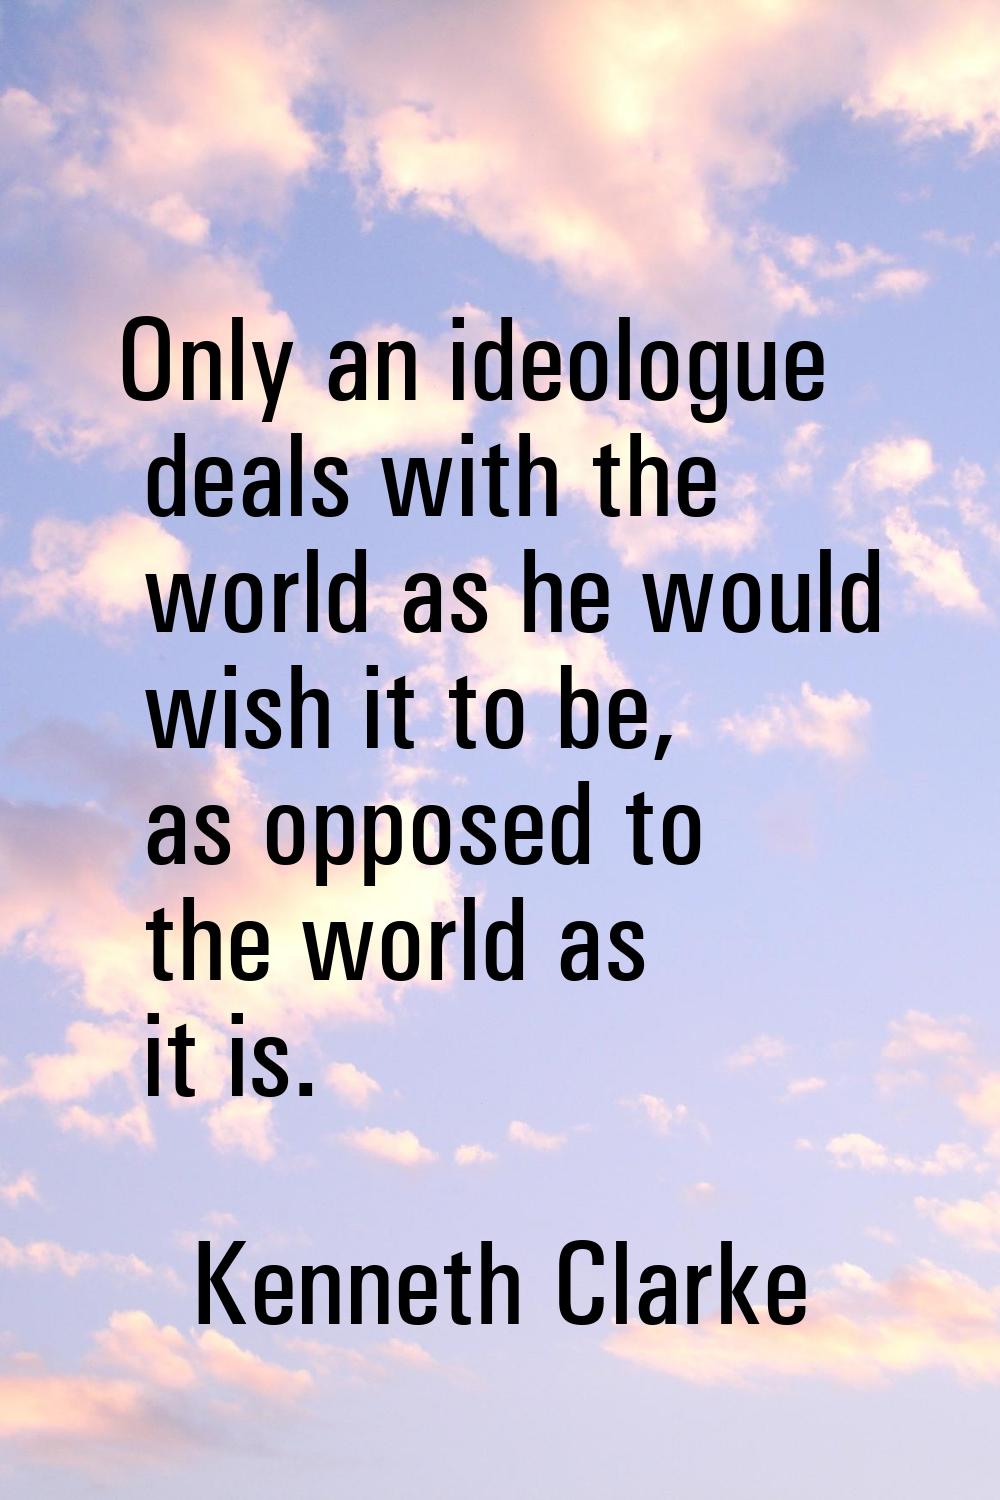 Only an ideologue deals with the world as he would wish it to be, as opposed to the world as it is.